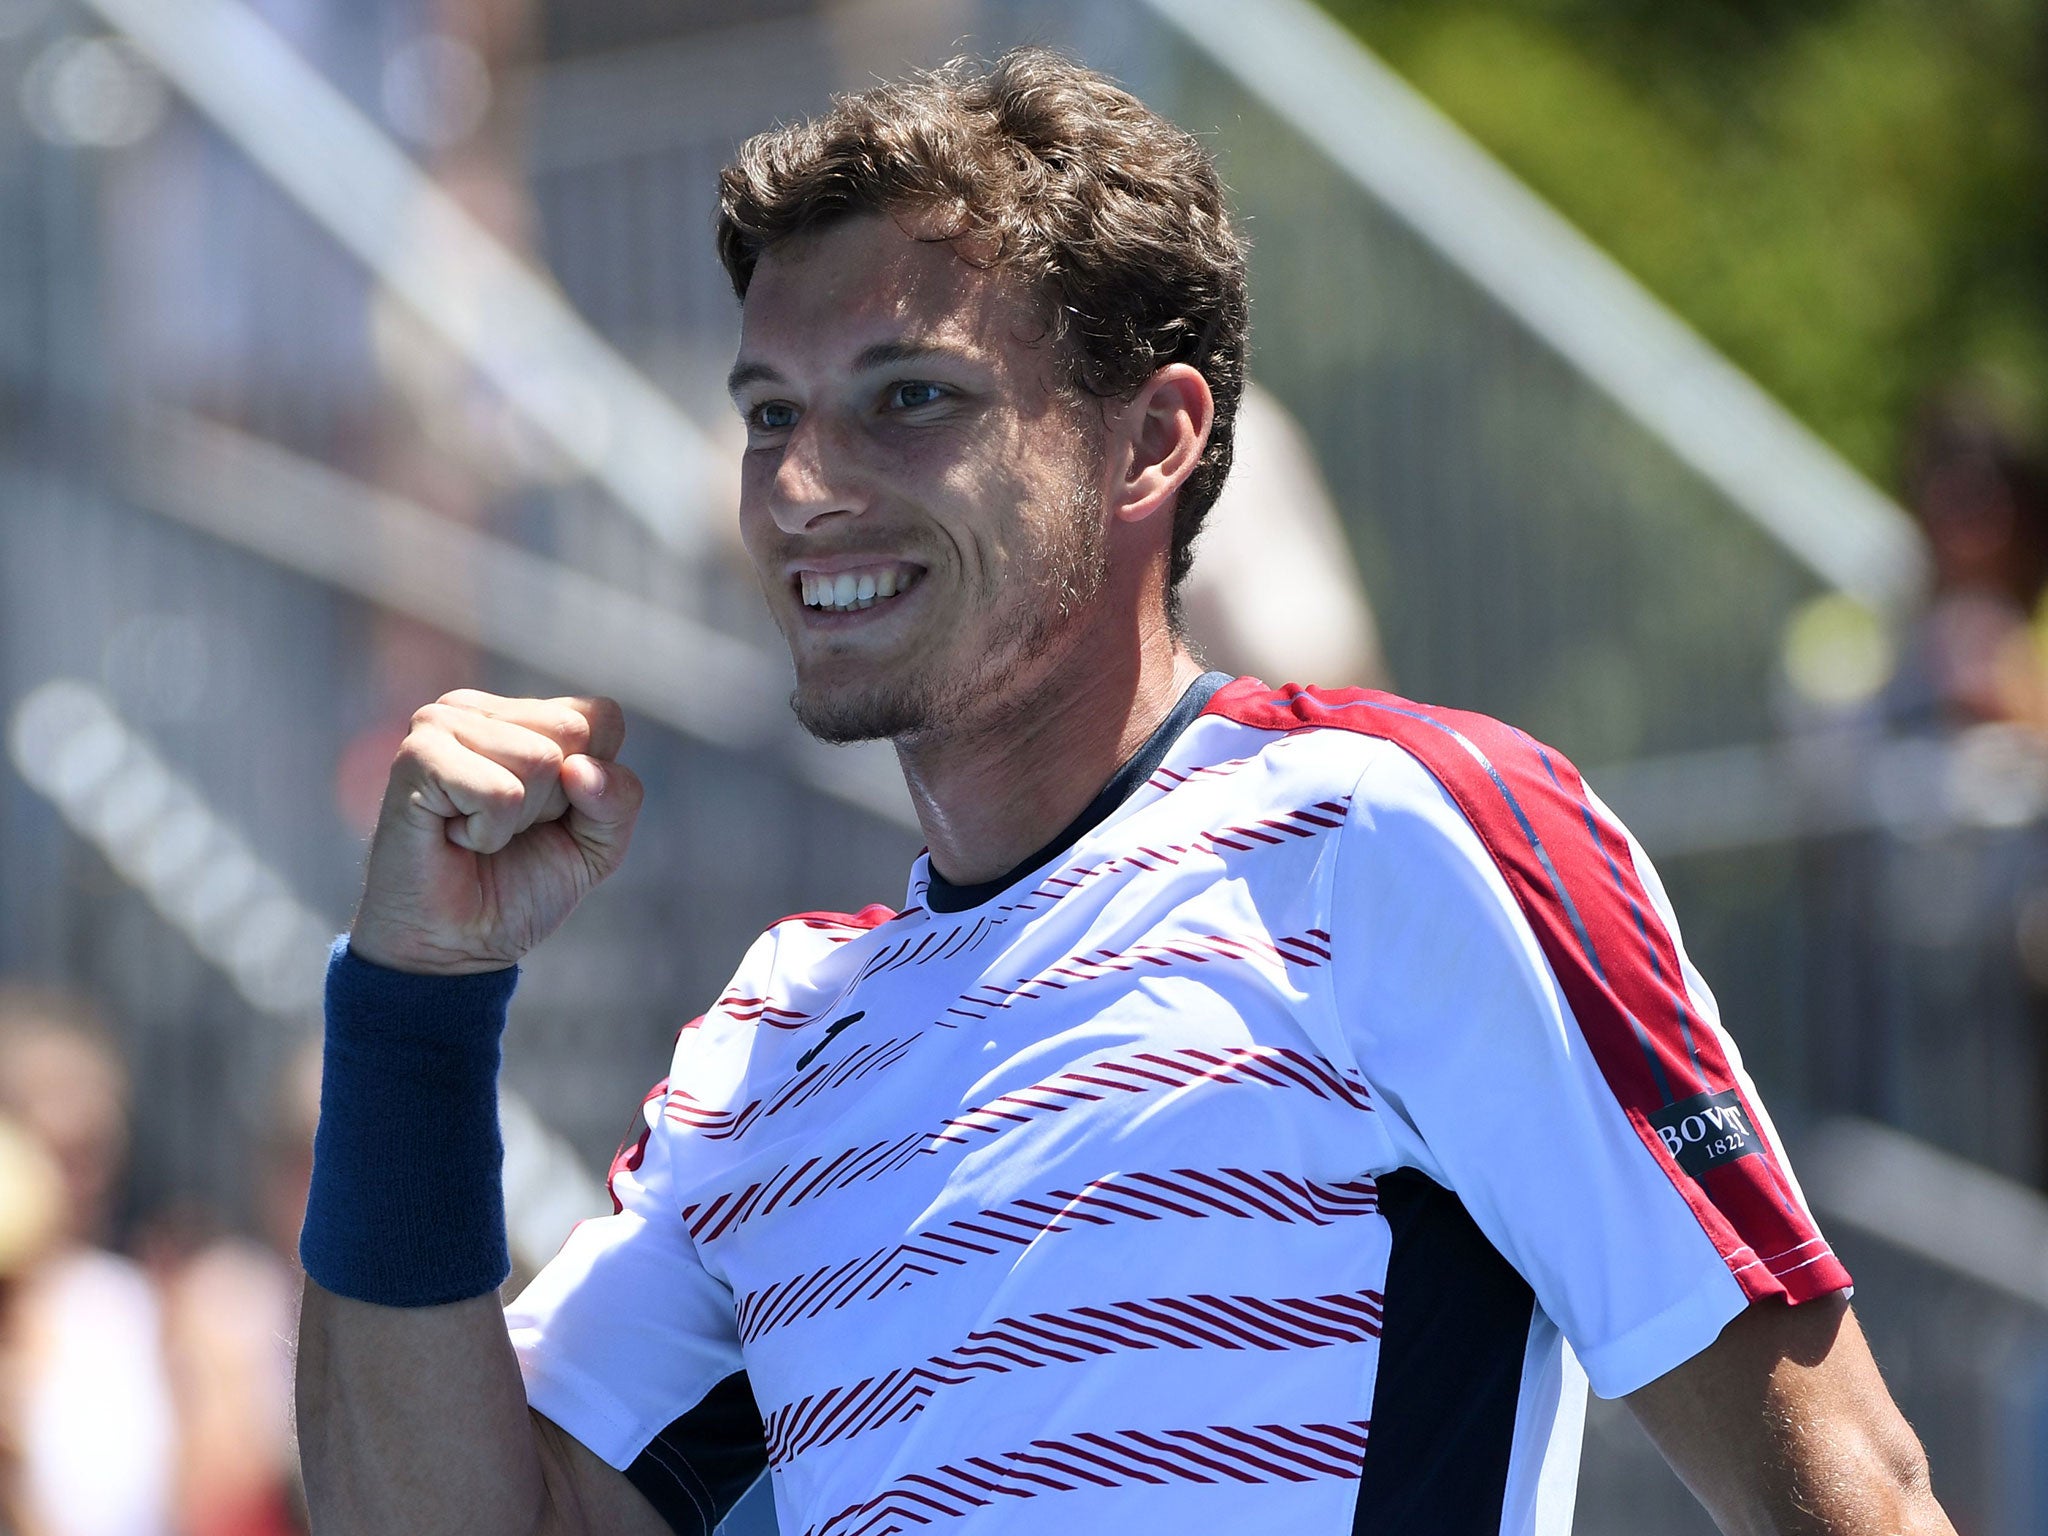 &#13;
Carreno Busta goes on to face Denis Istomin, who knocked out Novak Djokovic on Thursday &#13;